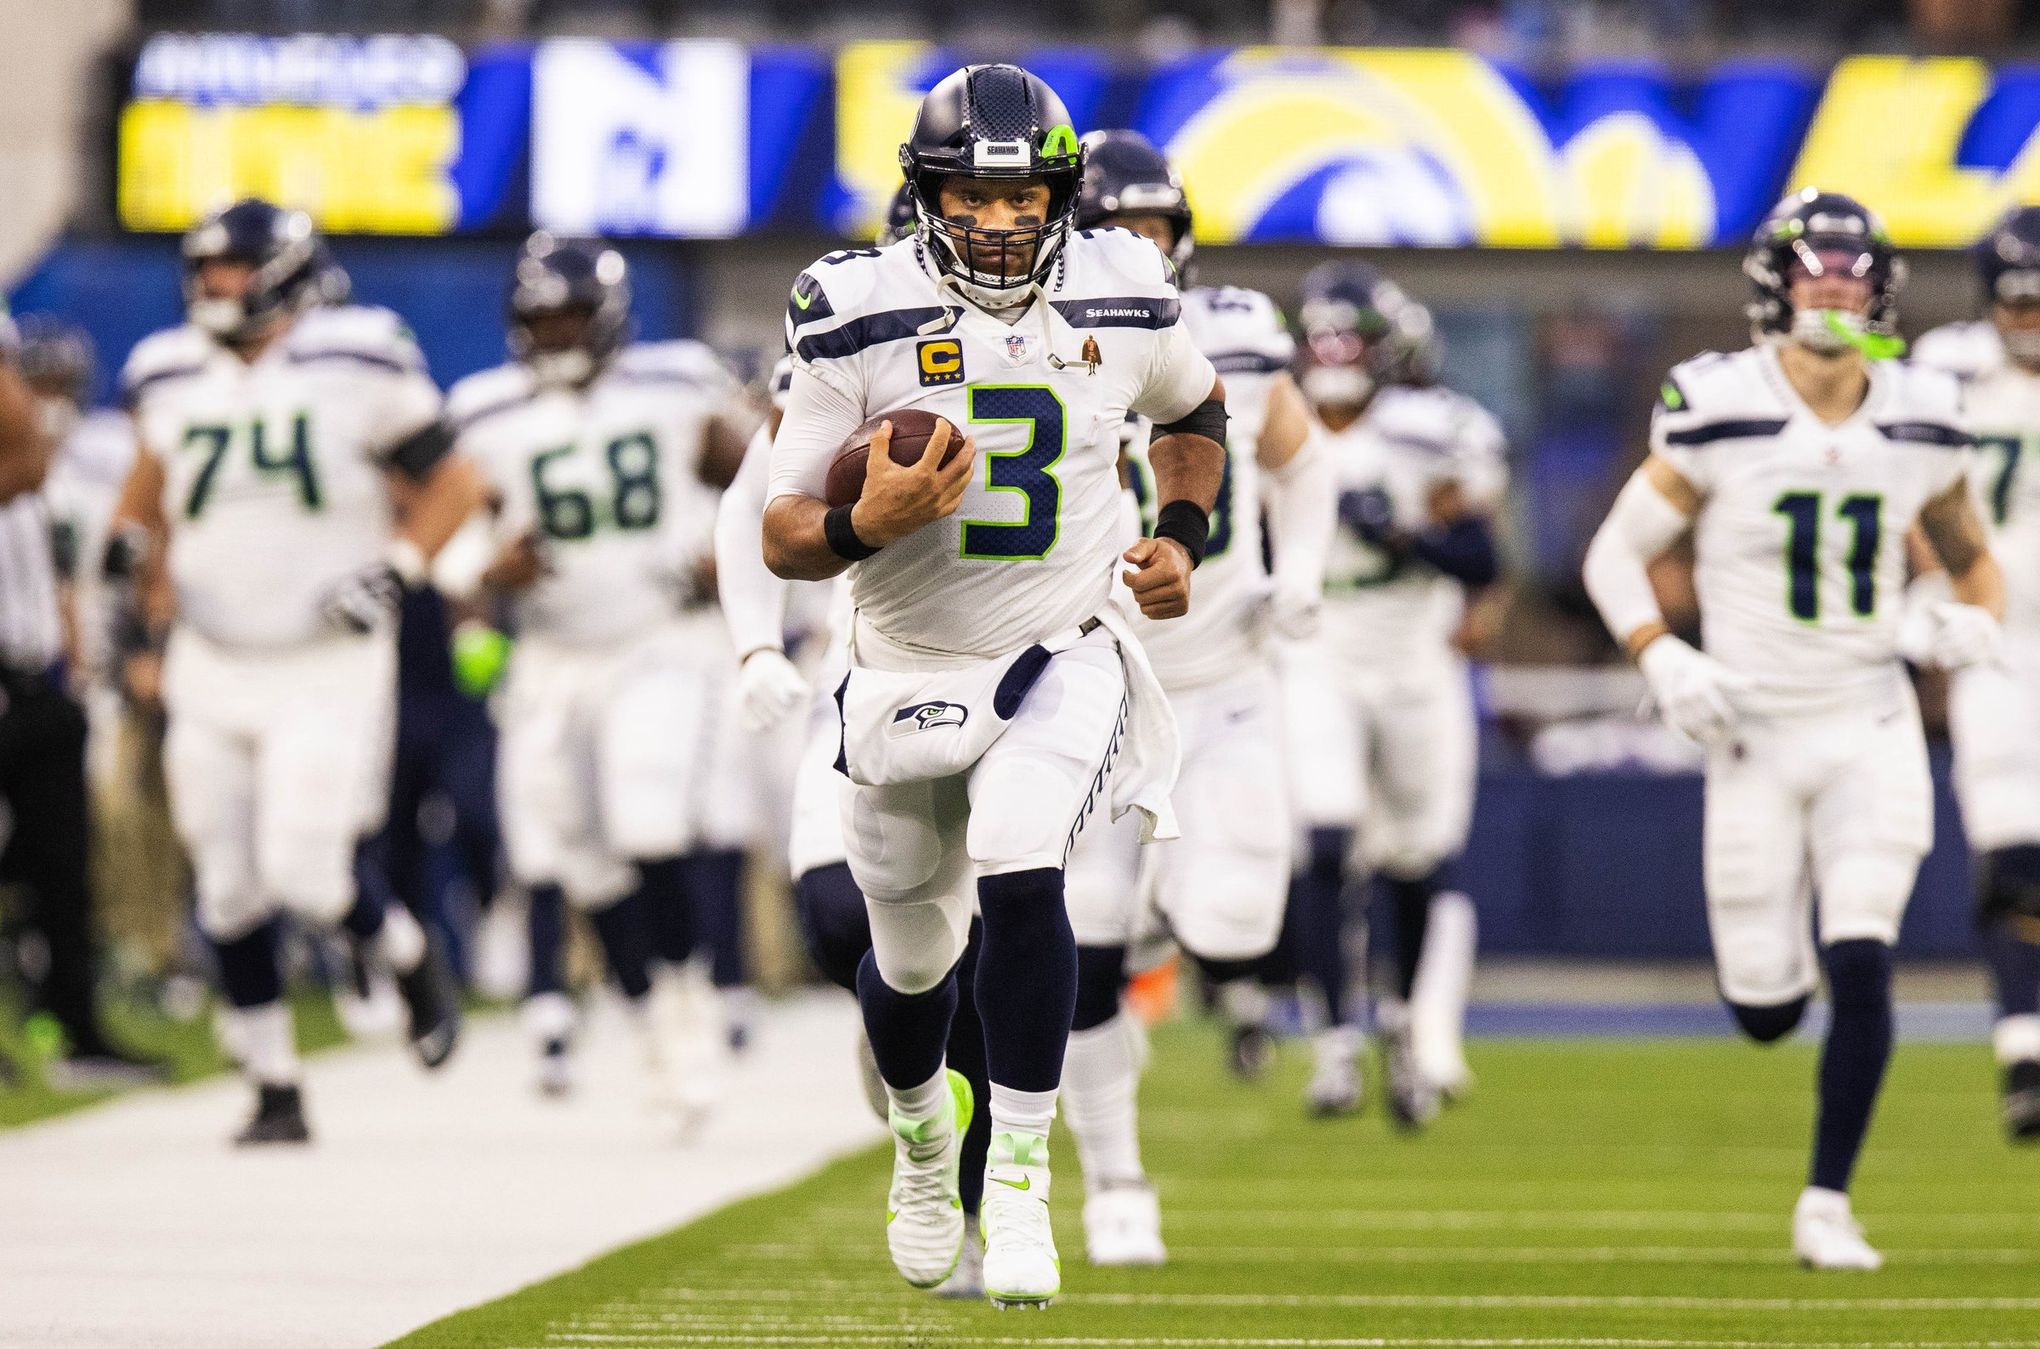 Five extra points: Russell Wilson is finally starting to show his